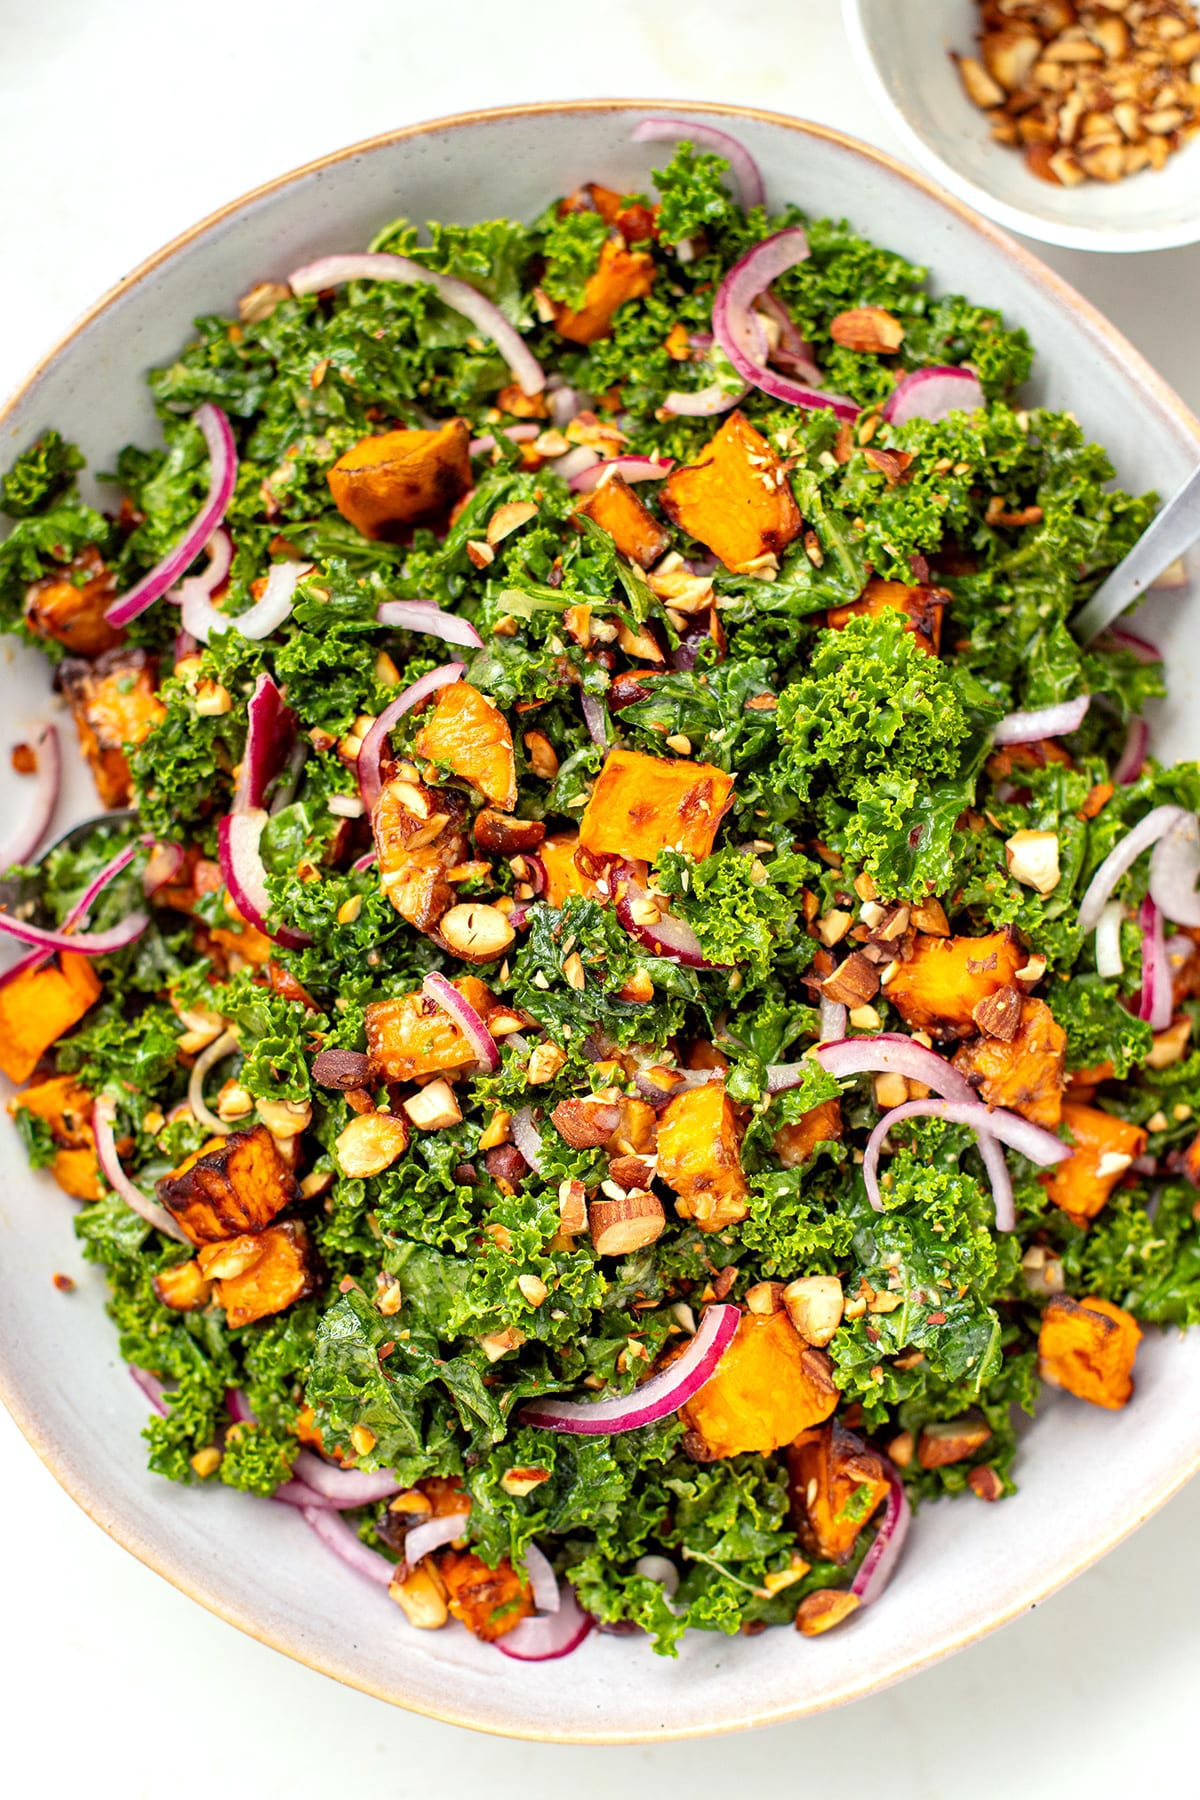 Kale salad with sweet potatoes, pickled onions, almonds and tahini dressing